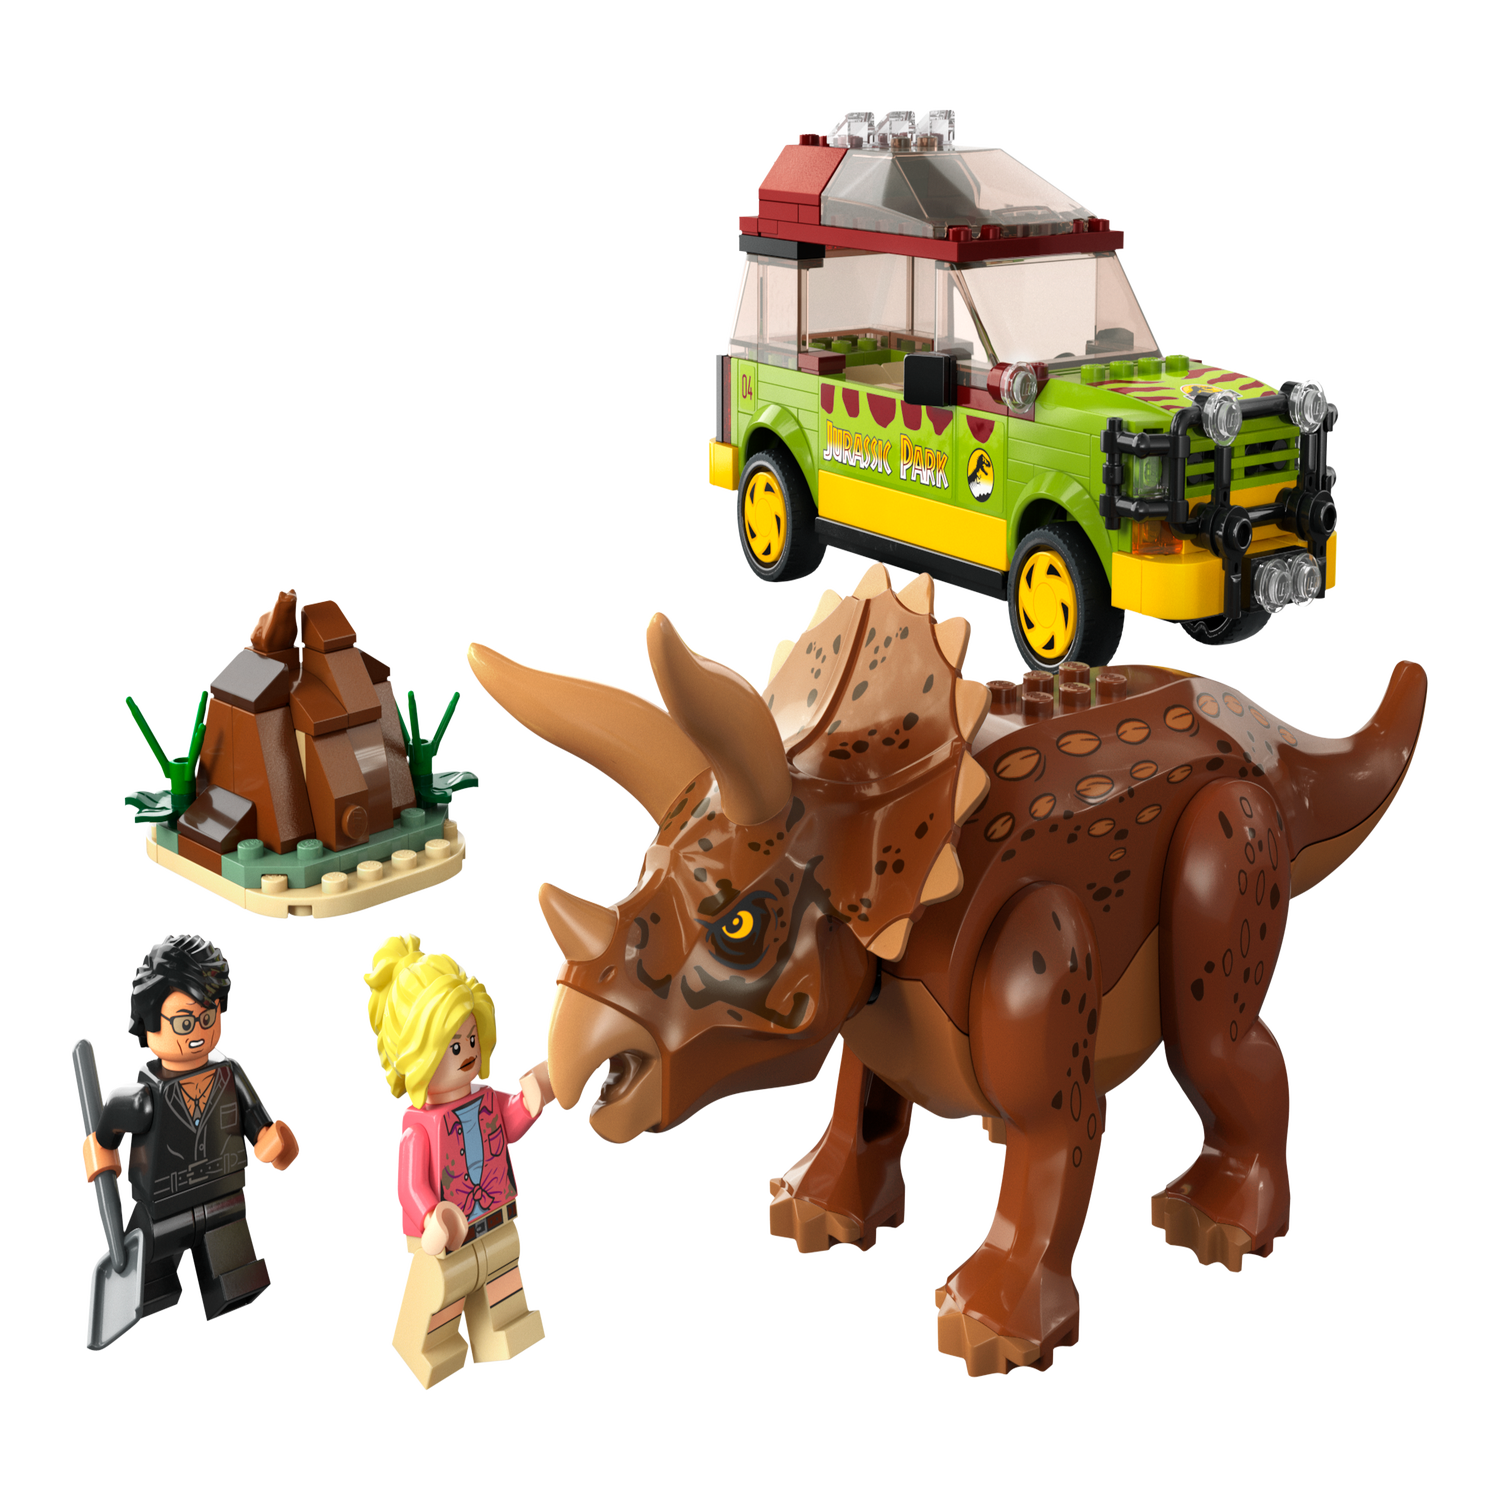 Triceratops Research 76959, Jurassic World™